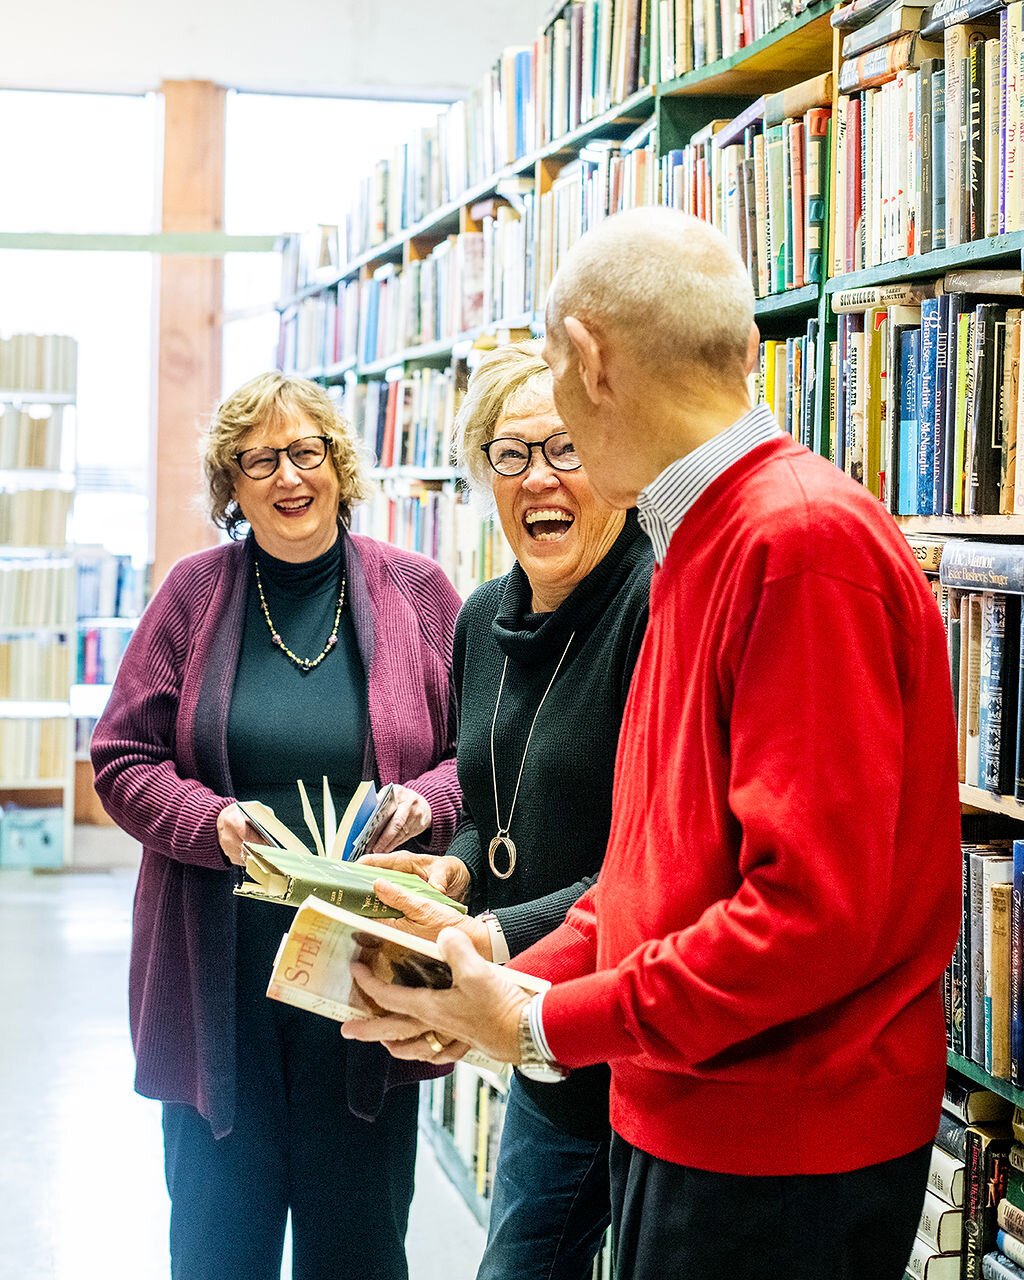 Retirees (left to right) Jan Roland, Beverly Vanderpool, and Dave Haist browse books at Reading Room Books in Wabash.